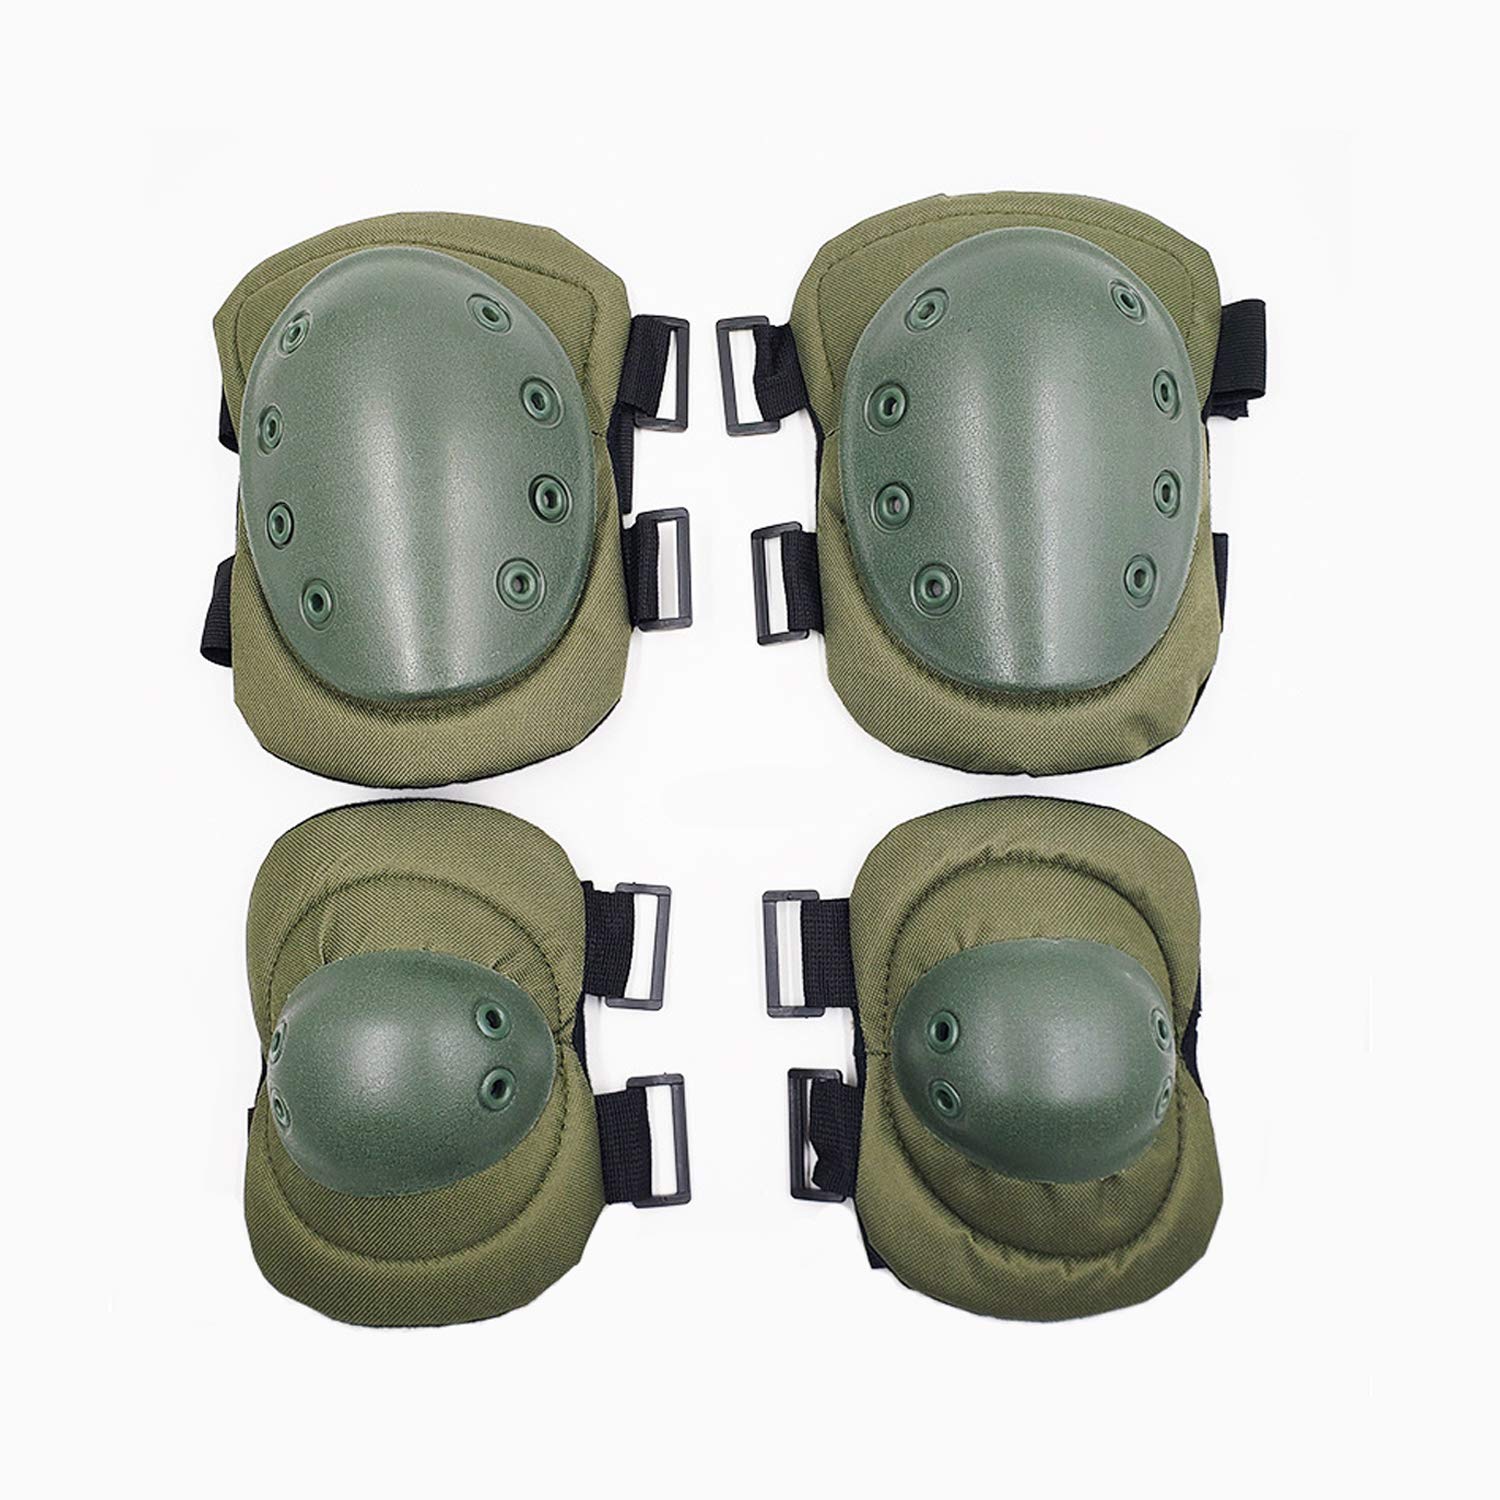 Electomania Outdoor Sports Gear Protective Pad Skate Skateboard ProtectorKnee Pads of 4 Piece Set